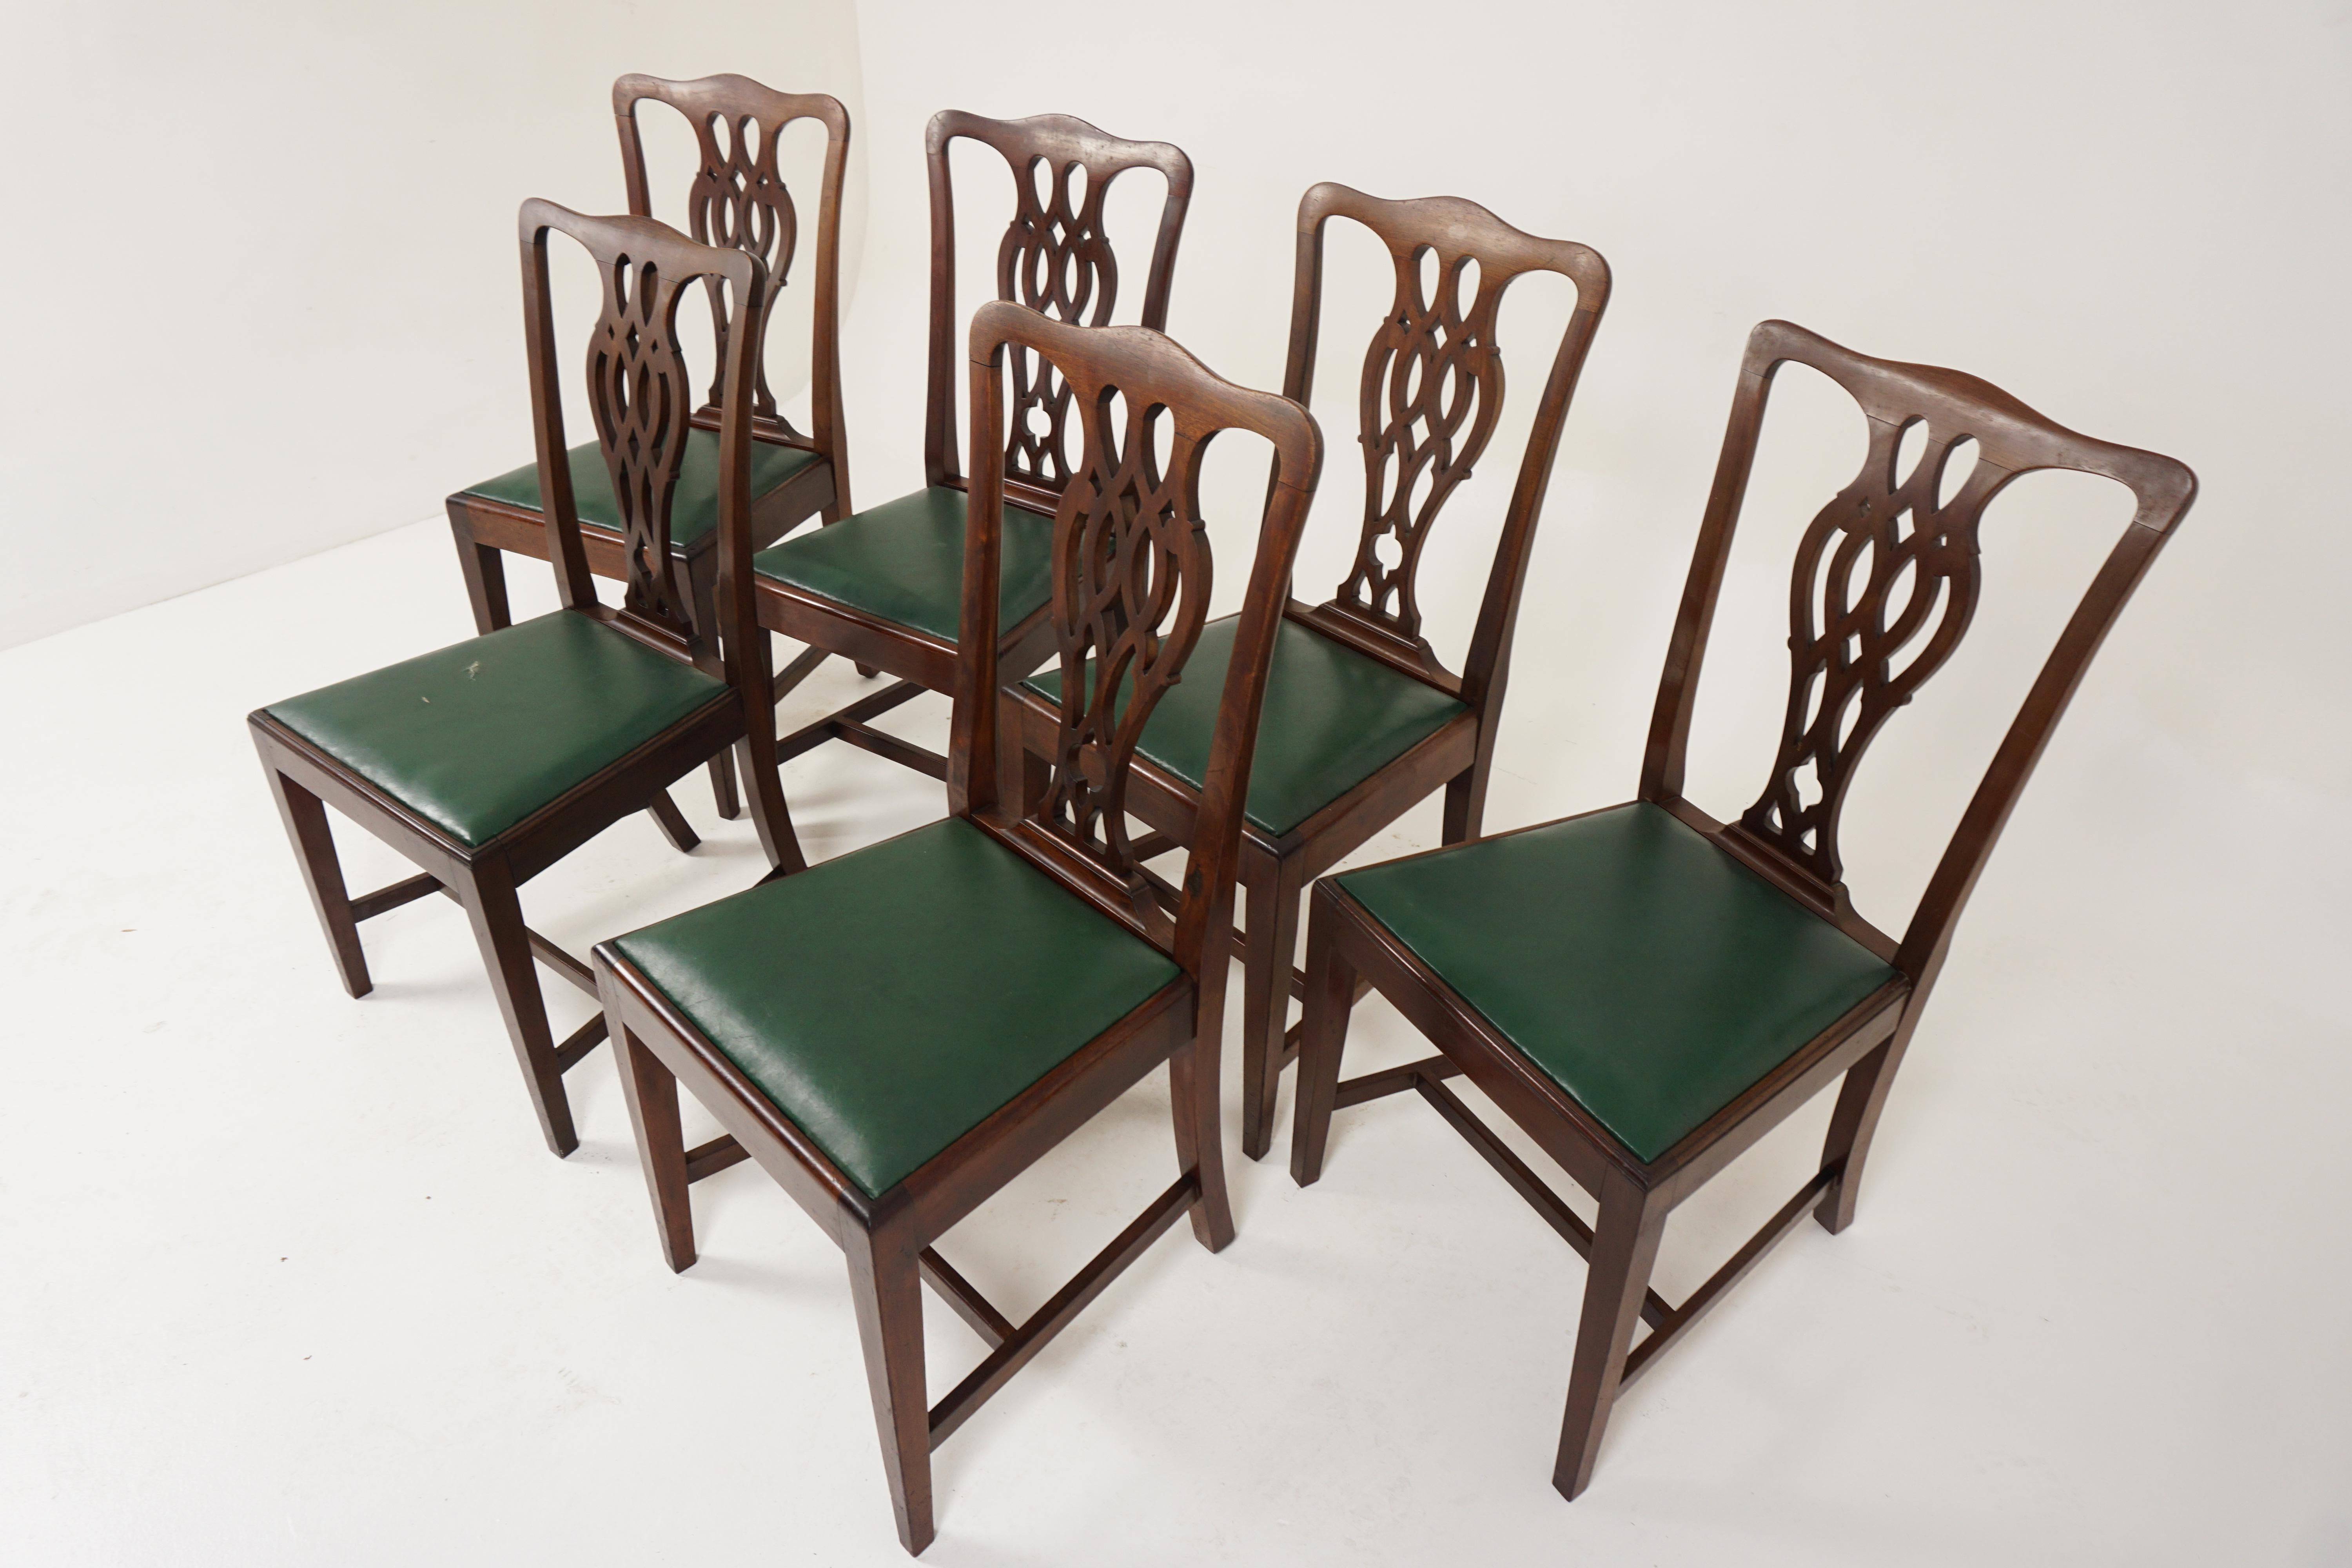 Vintage dining chairs, set of 6, walnut, Chippendale style, Scotland 1920, H142

Scotland 1920
Solid walnut
Original finish
Wavy shaped top rail with a pierced back splat
Large comfortable lift out seat
All standing on tapered legs
Connected with a